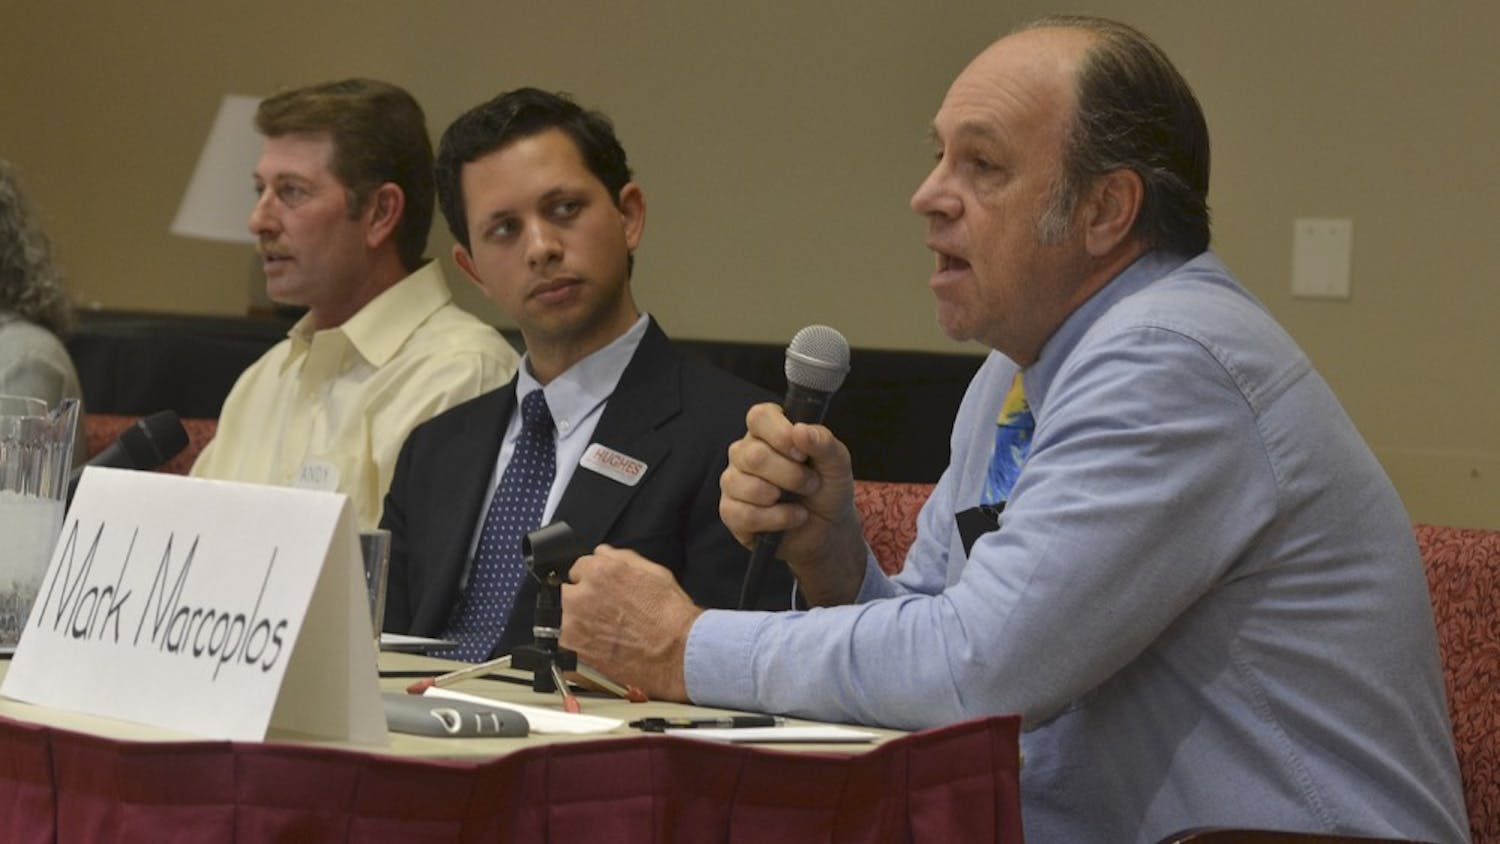 Marc Marcoplos responds to a question posed by a member of the audience. Candidates for the Orange County Board of Commissioners spoke at a forum on Tuesday afternoon, March 1.